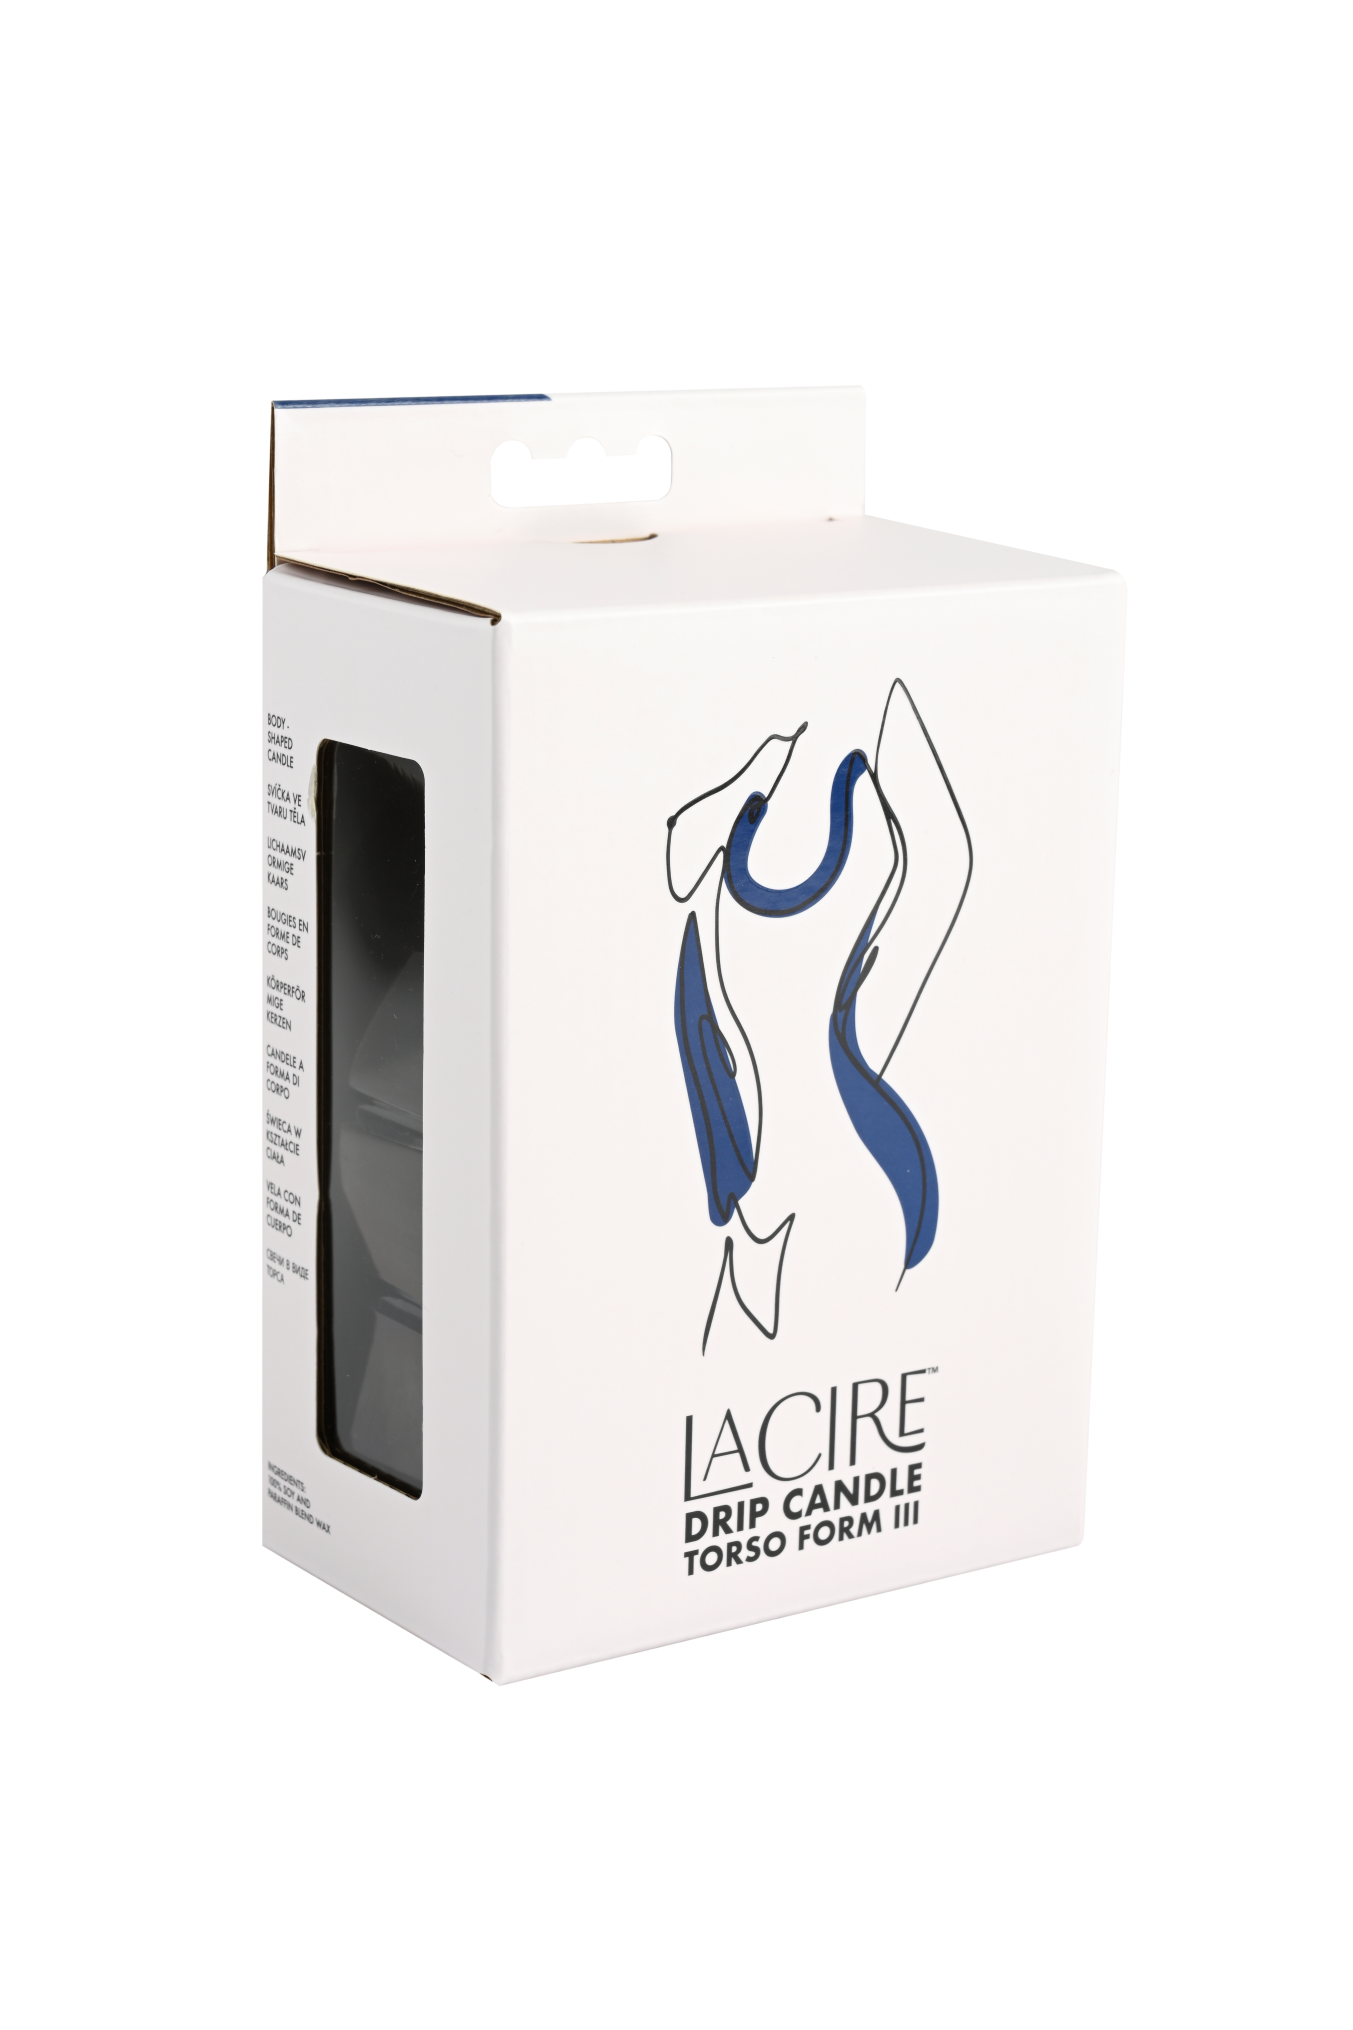 Side angle of the box that the LaCire Torso Candle from Sportsheets (form 3/blue) comes in.